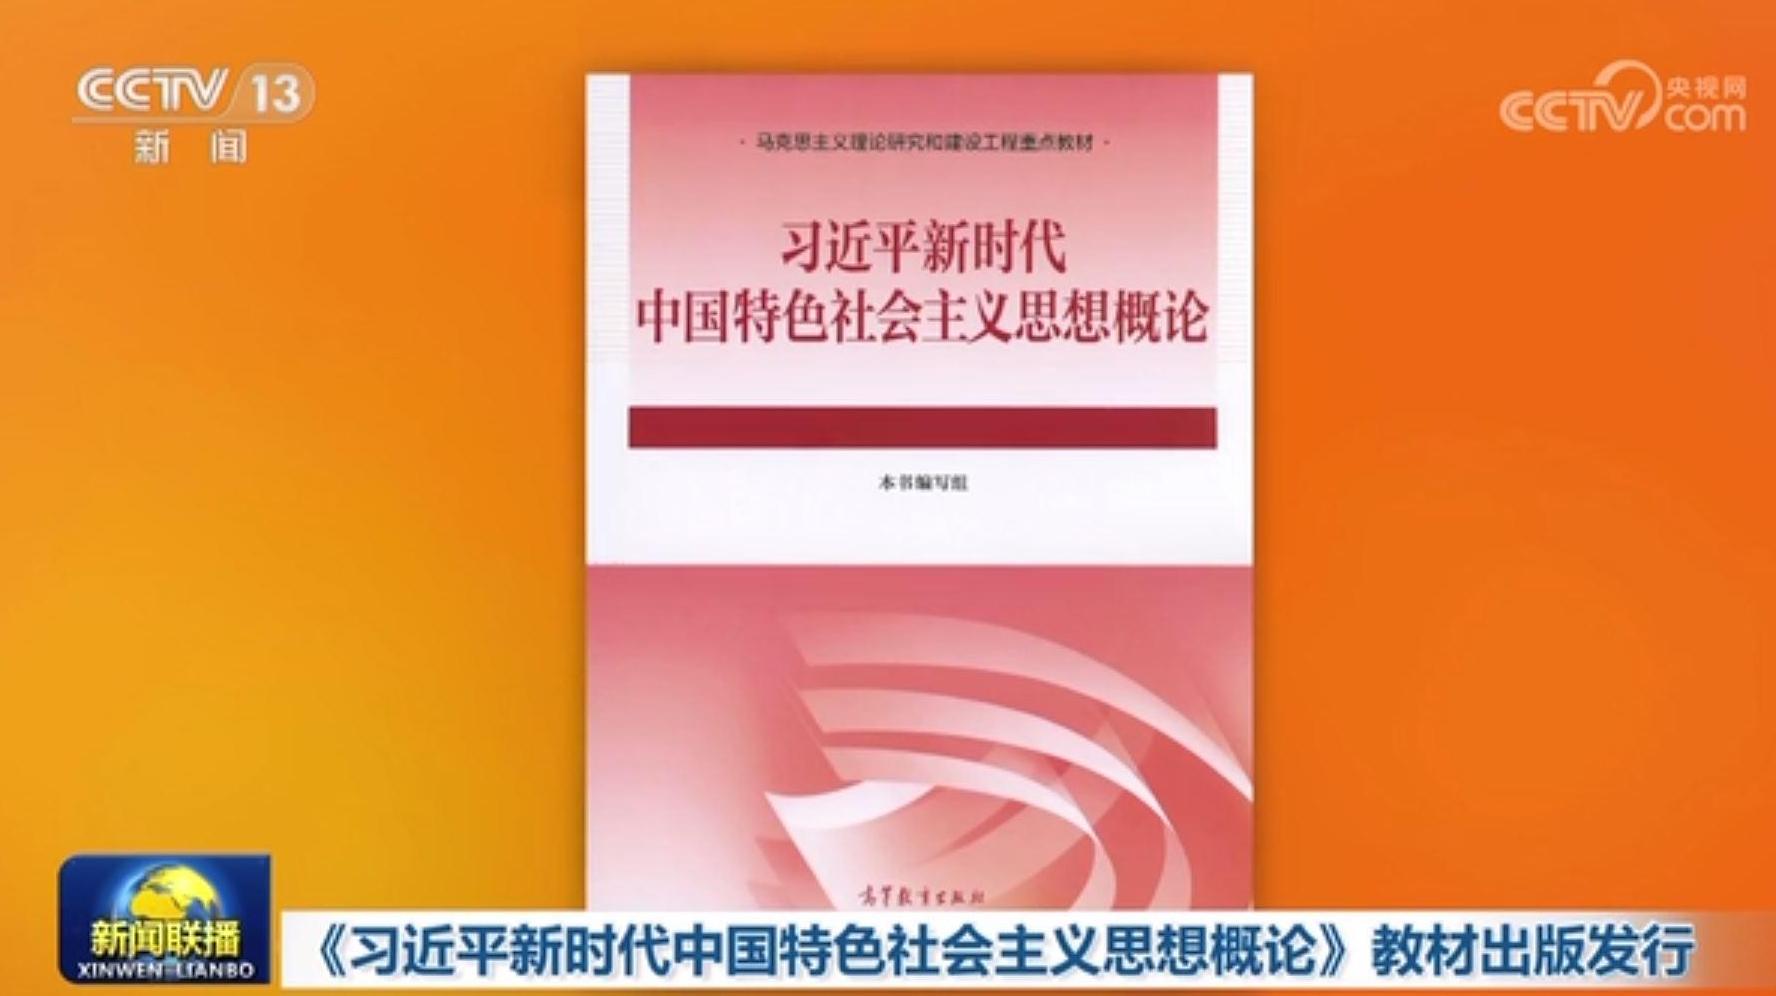 China publishes higher education textbook on Xi thought